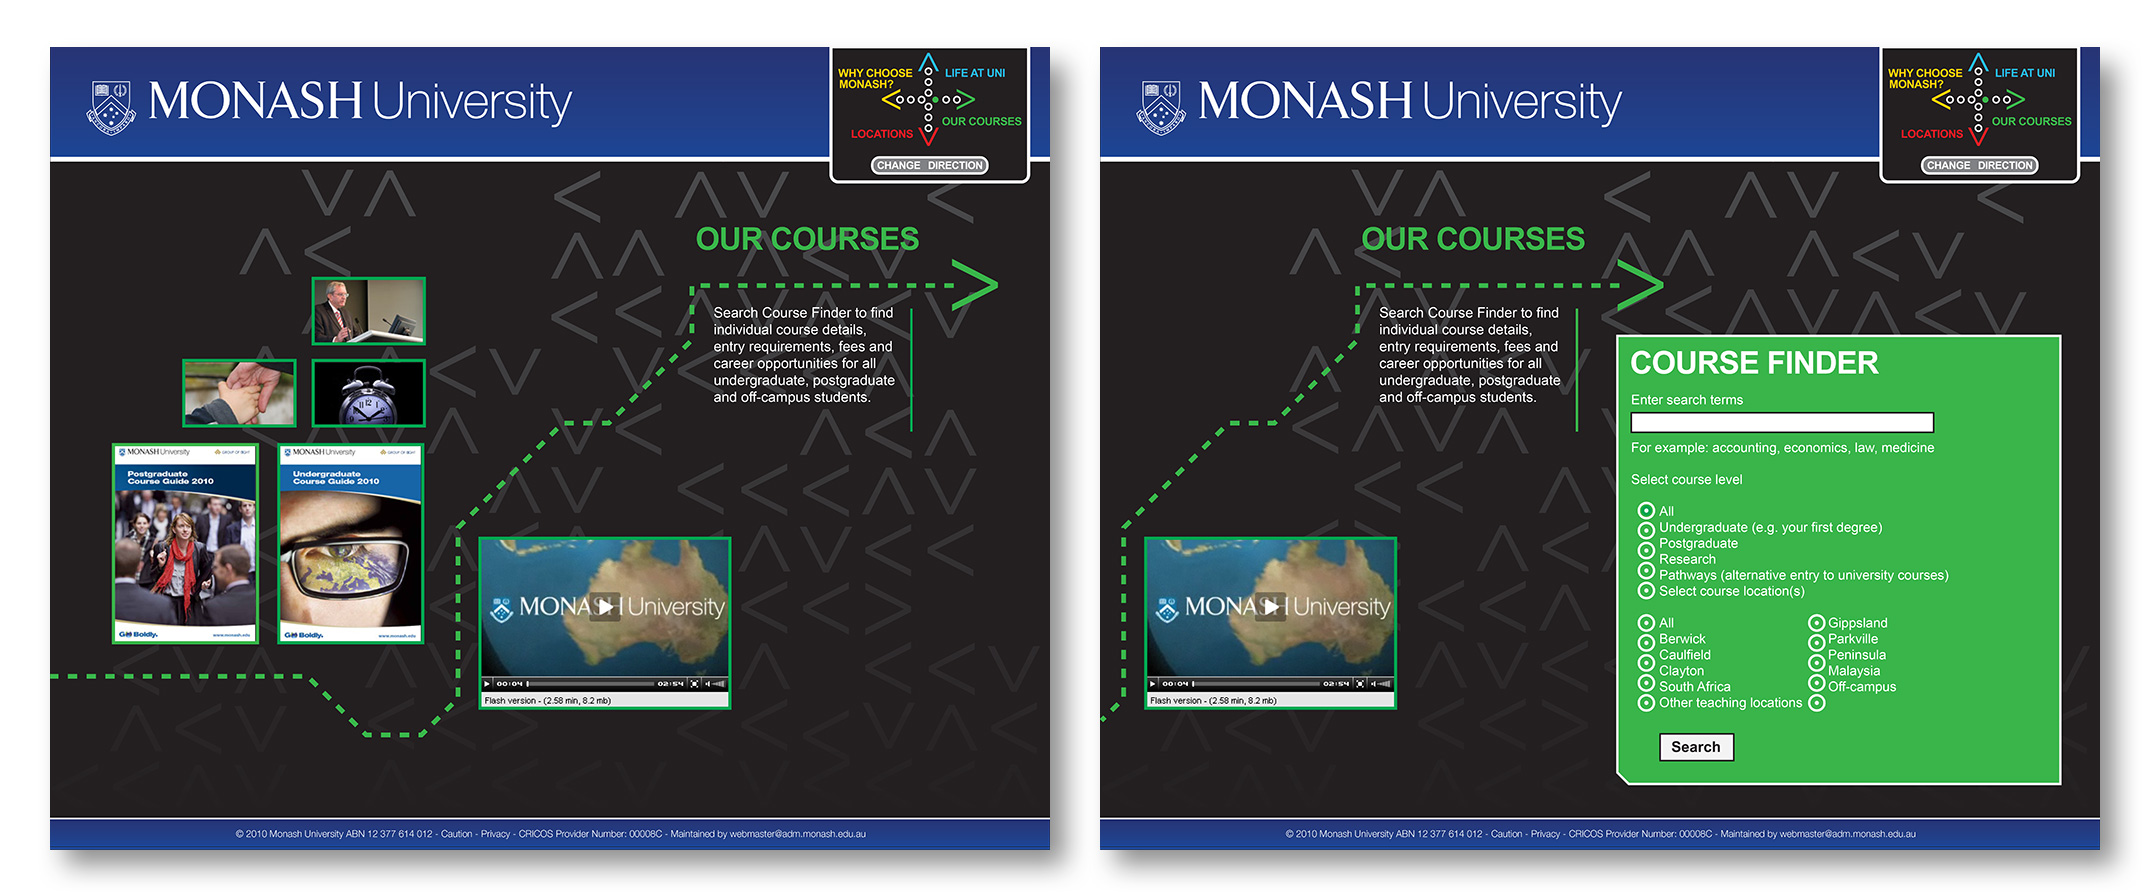 Our courses - Look at Monash